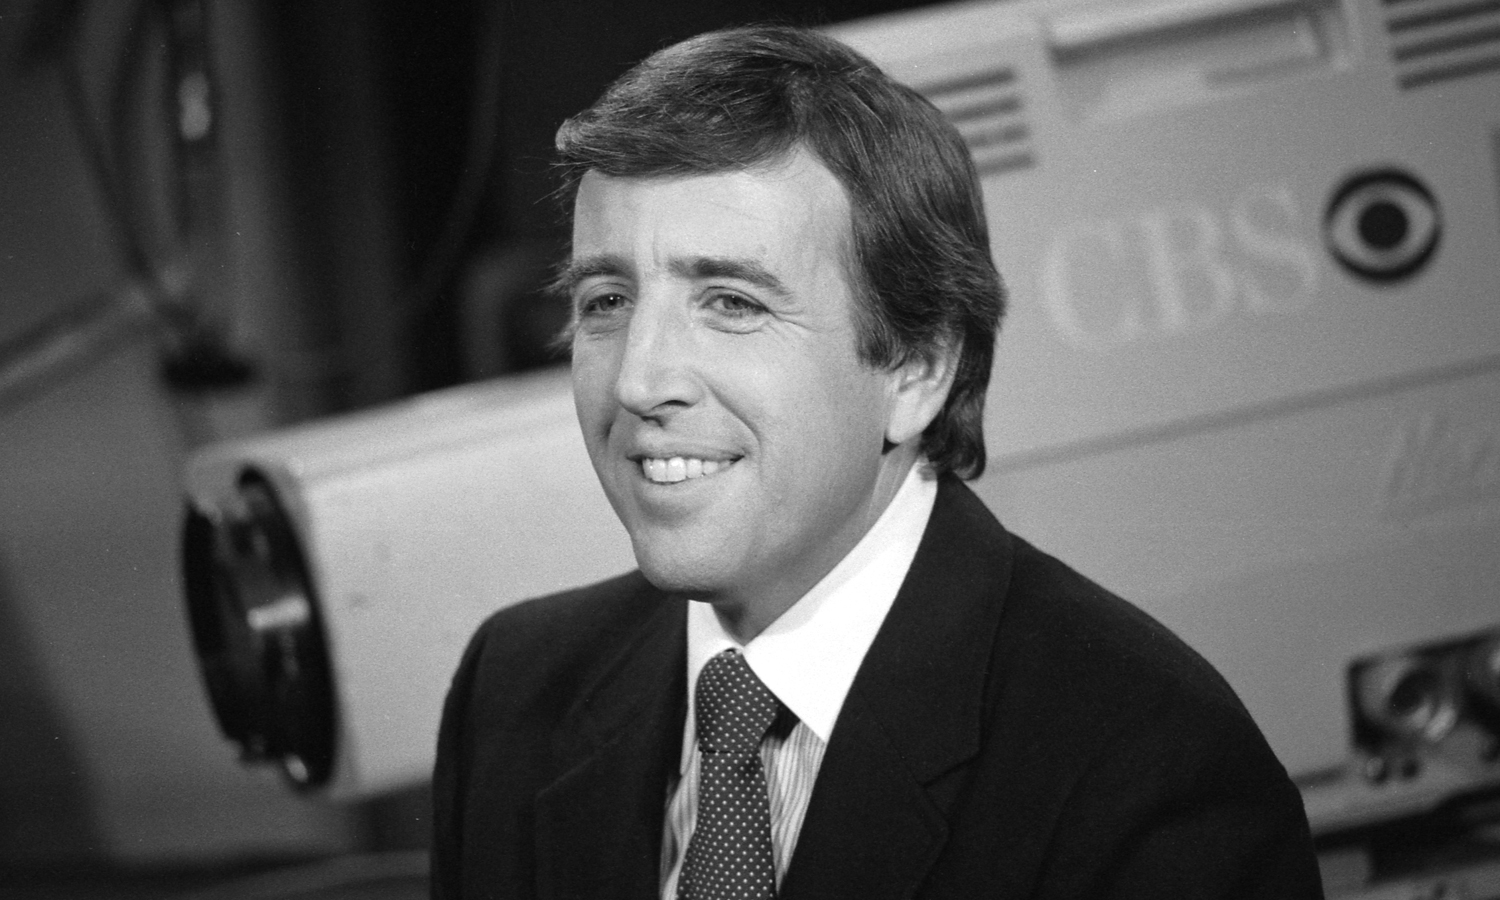 Sports Broadcasting Hall of Fame Brent Musburger, An Iconic Voice